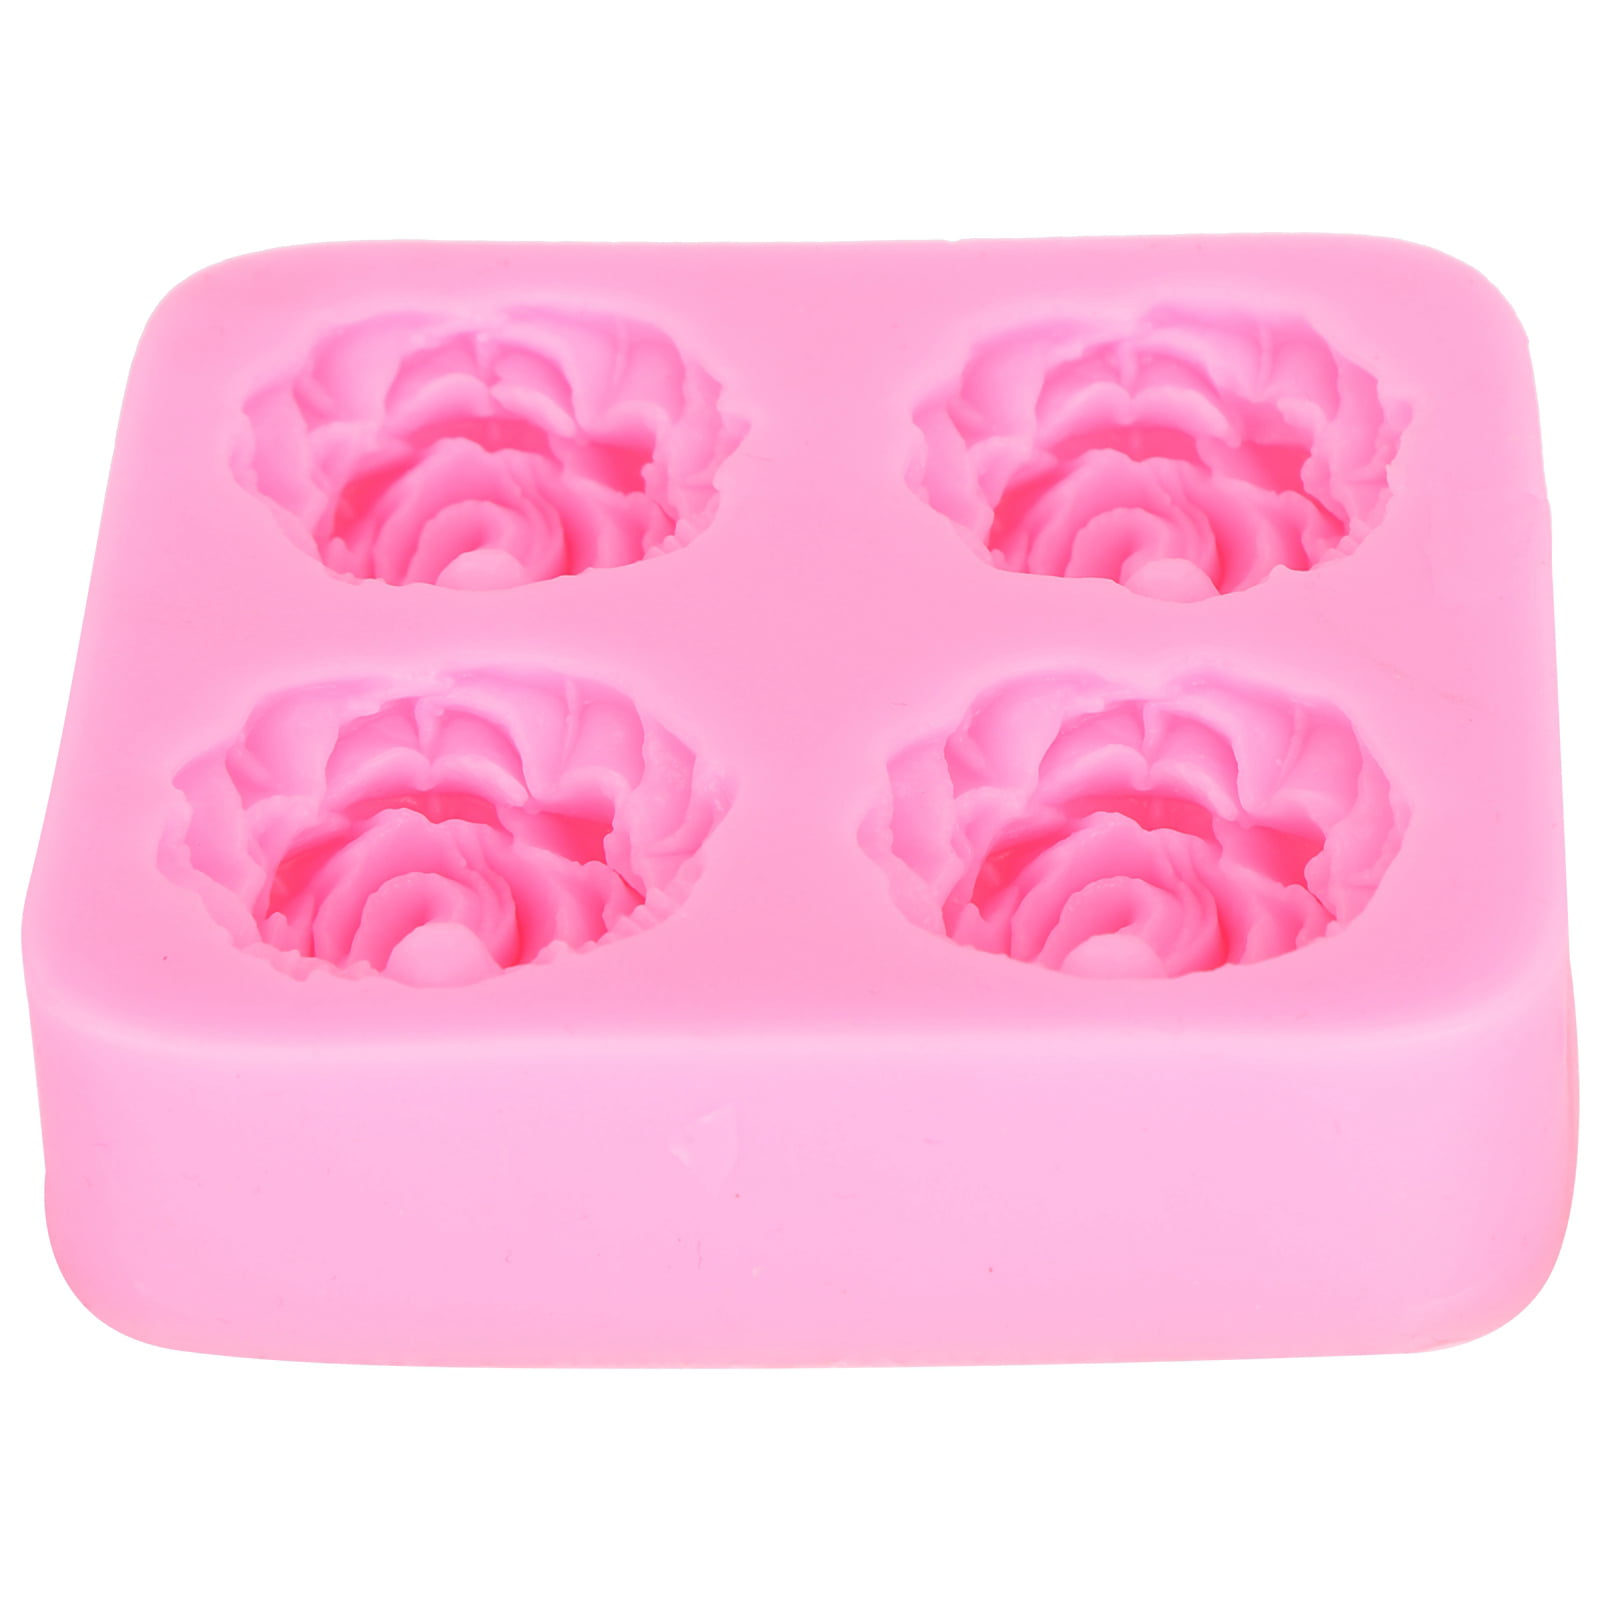 Details about   3D Baby Foot Silicone Mold Chocolate Fondant Cake Decor Baking Tool Mould DIY 